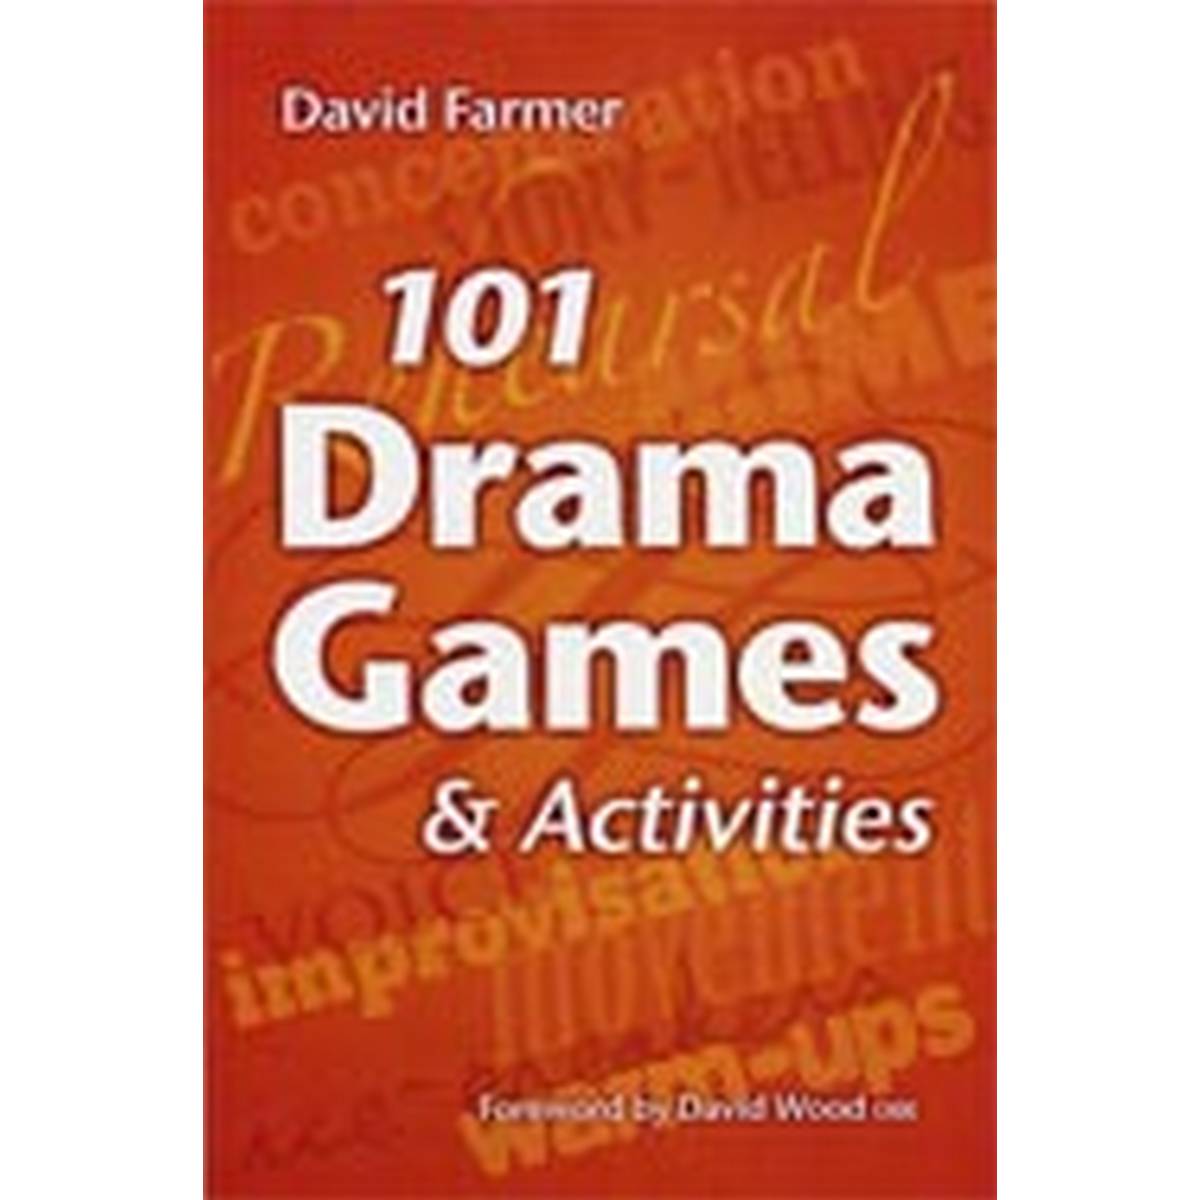 101 Drama Games and Activities